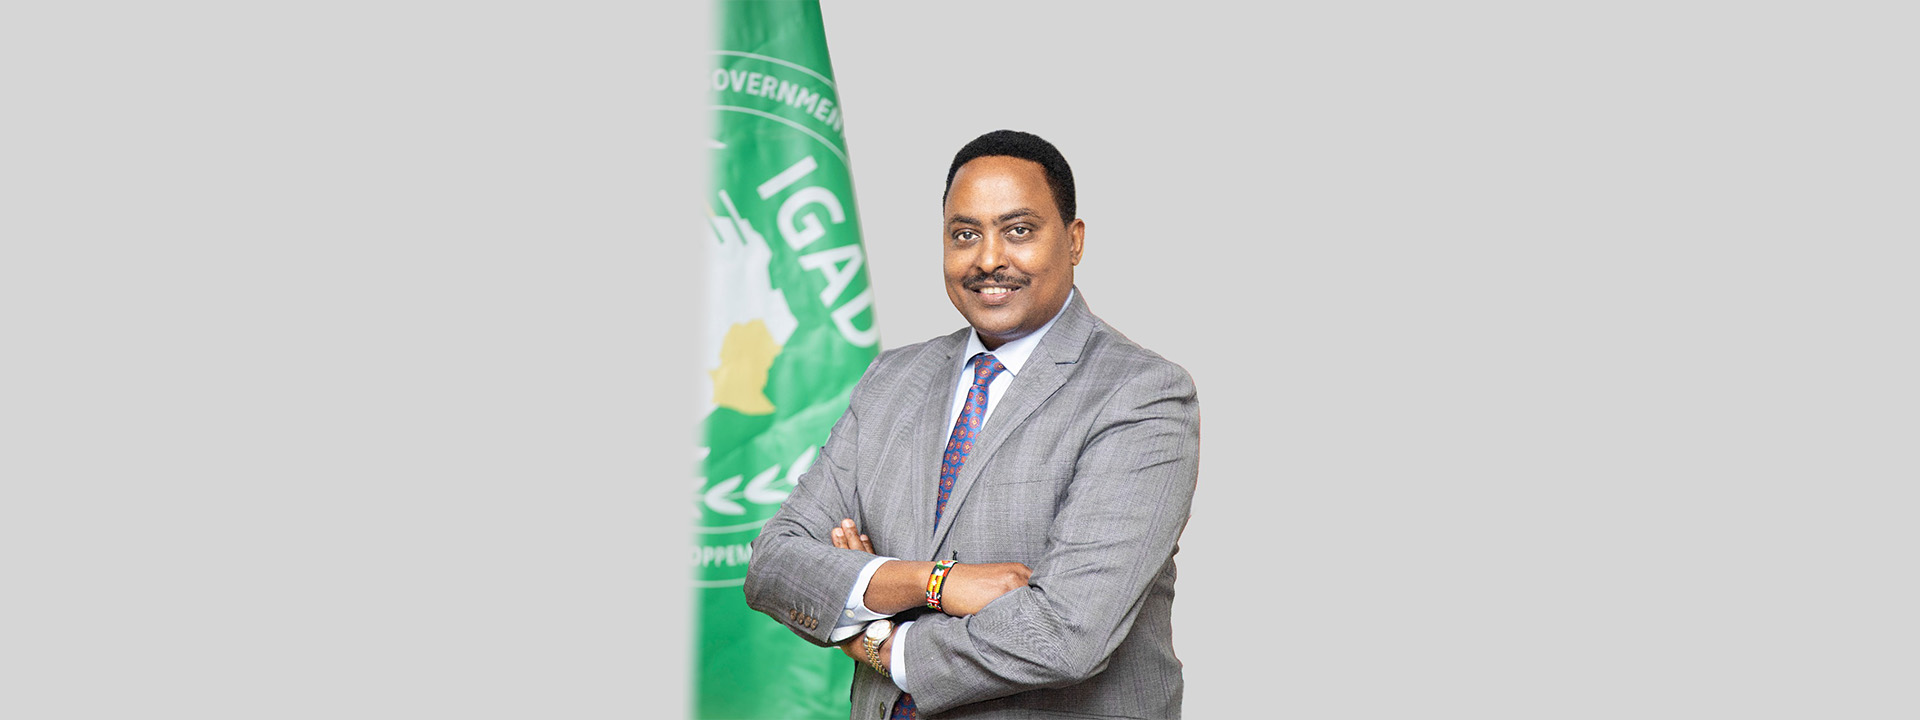 IGAD Executive Secretary, Dr Workneh Gebeyehu, Arrives in New York for the UNGA 77